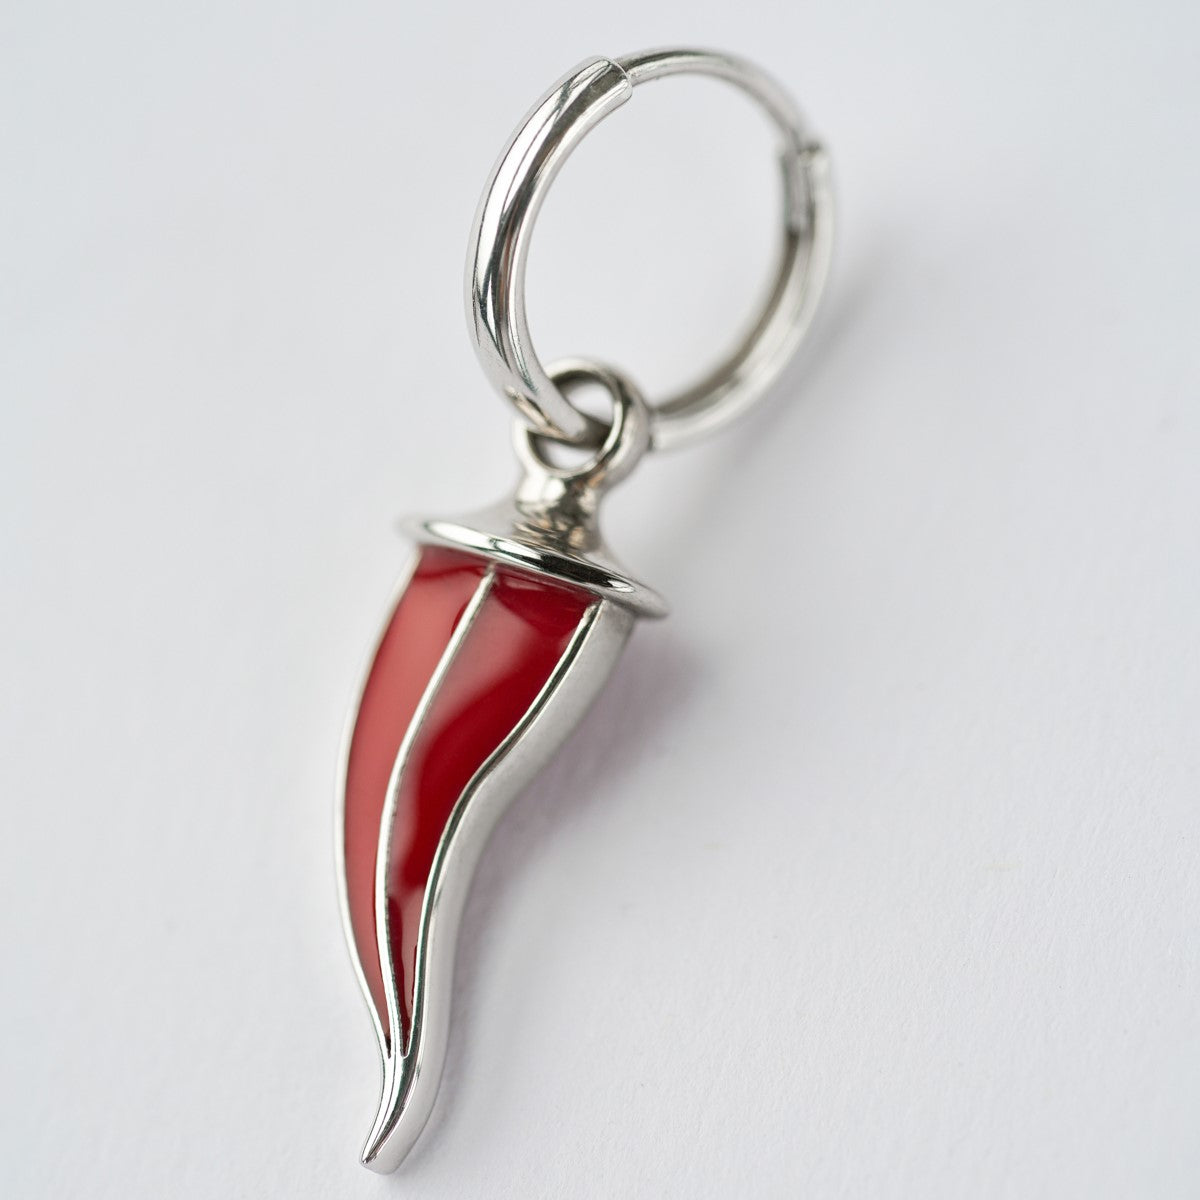 EARRING "LUCKY FLAME" WITH RED ENAMEL / SILVER